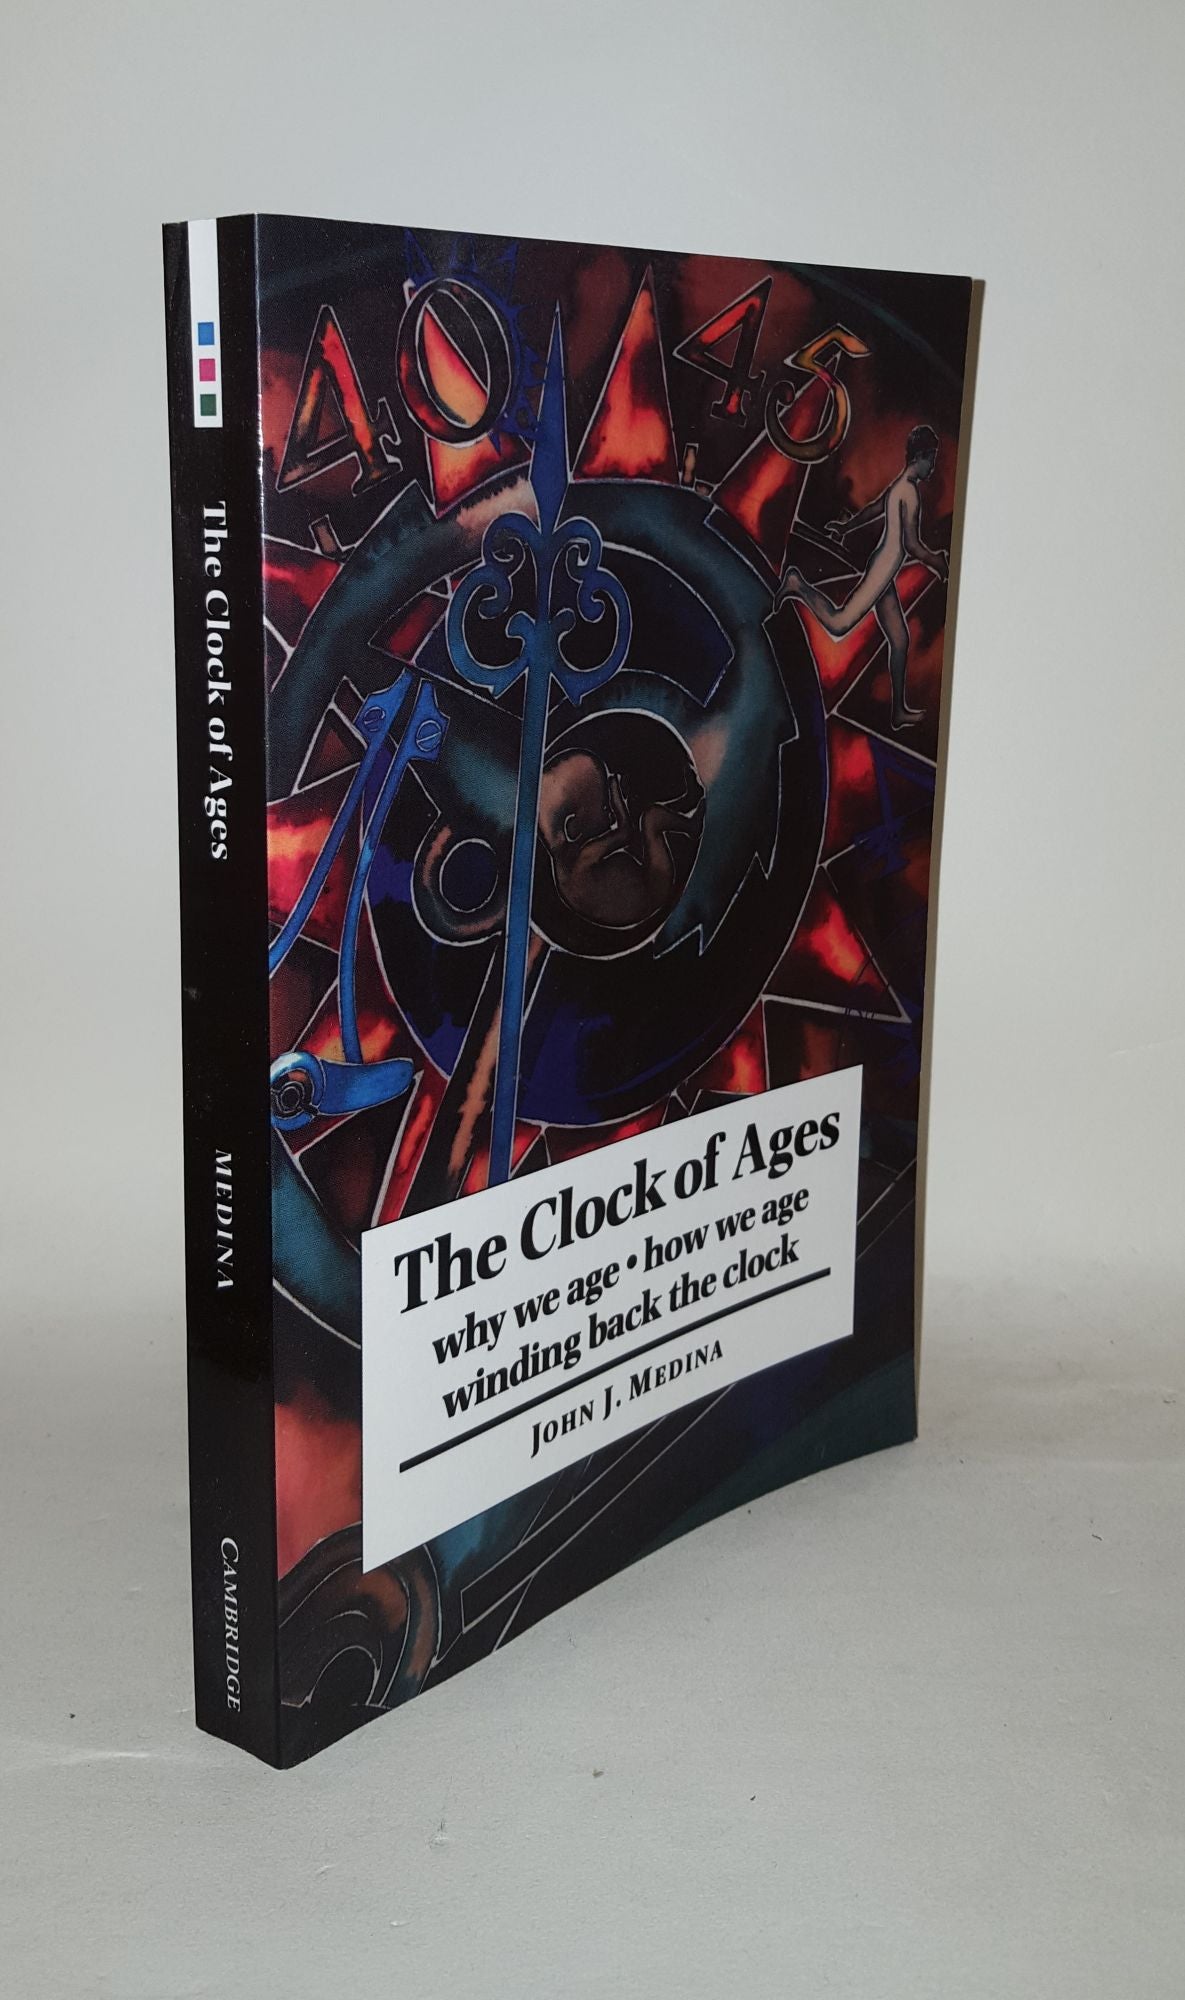 MEDINA John J. - The Clock of Ages? Why We Age How We Age Winding Back the Clock